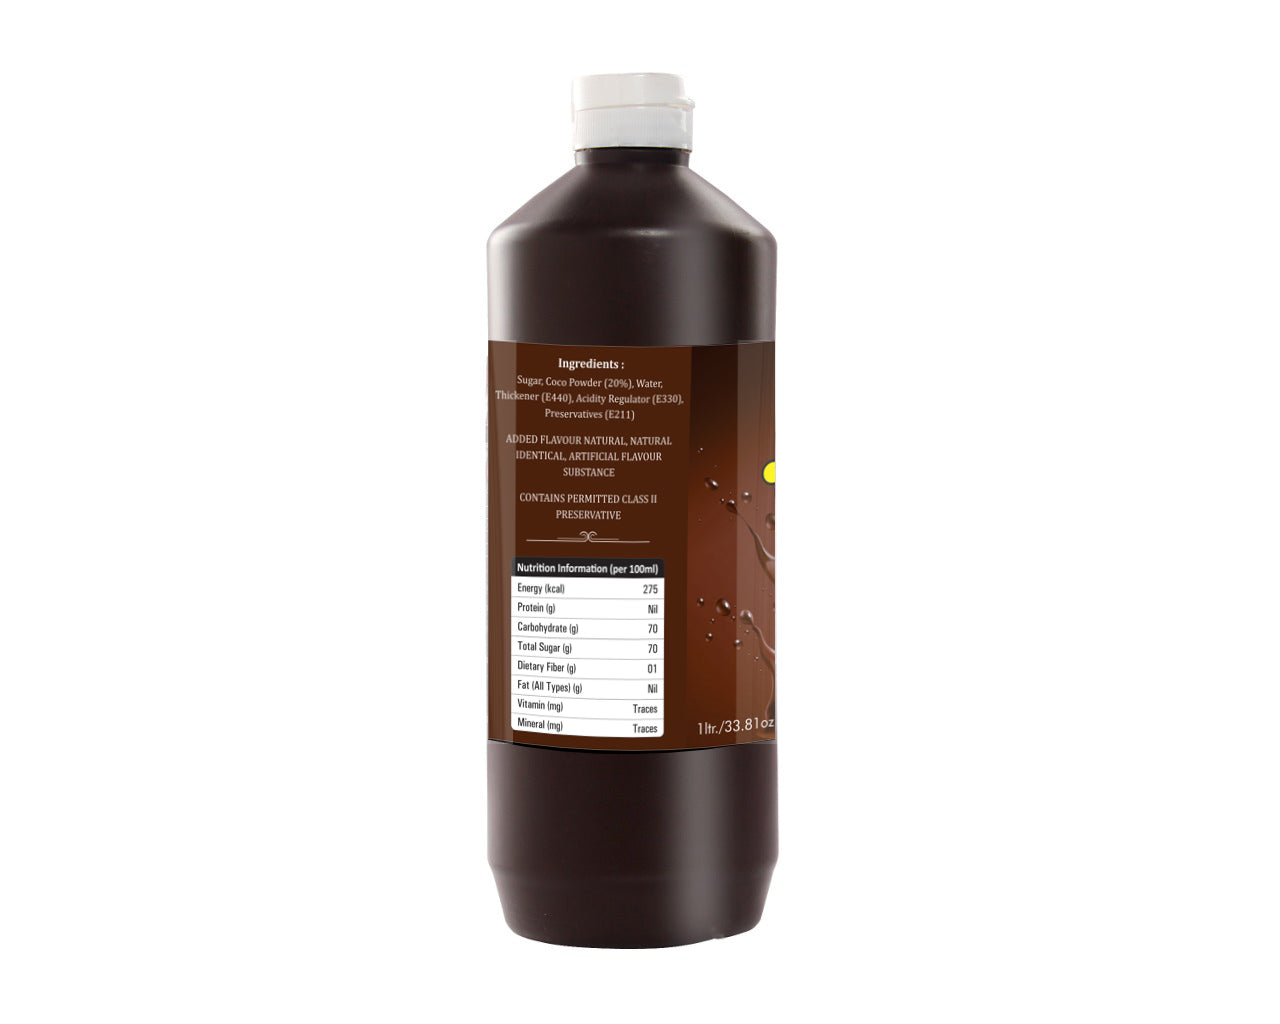 Chocolate Topping Best Quality 1 Liter